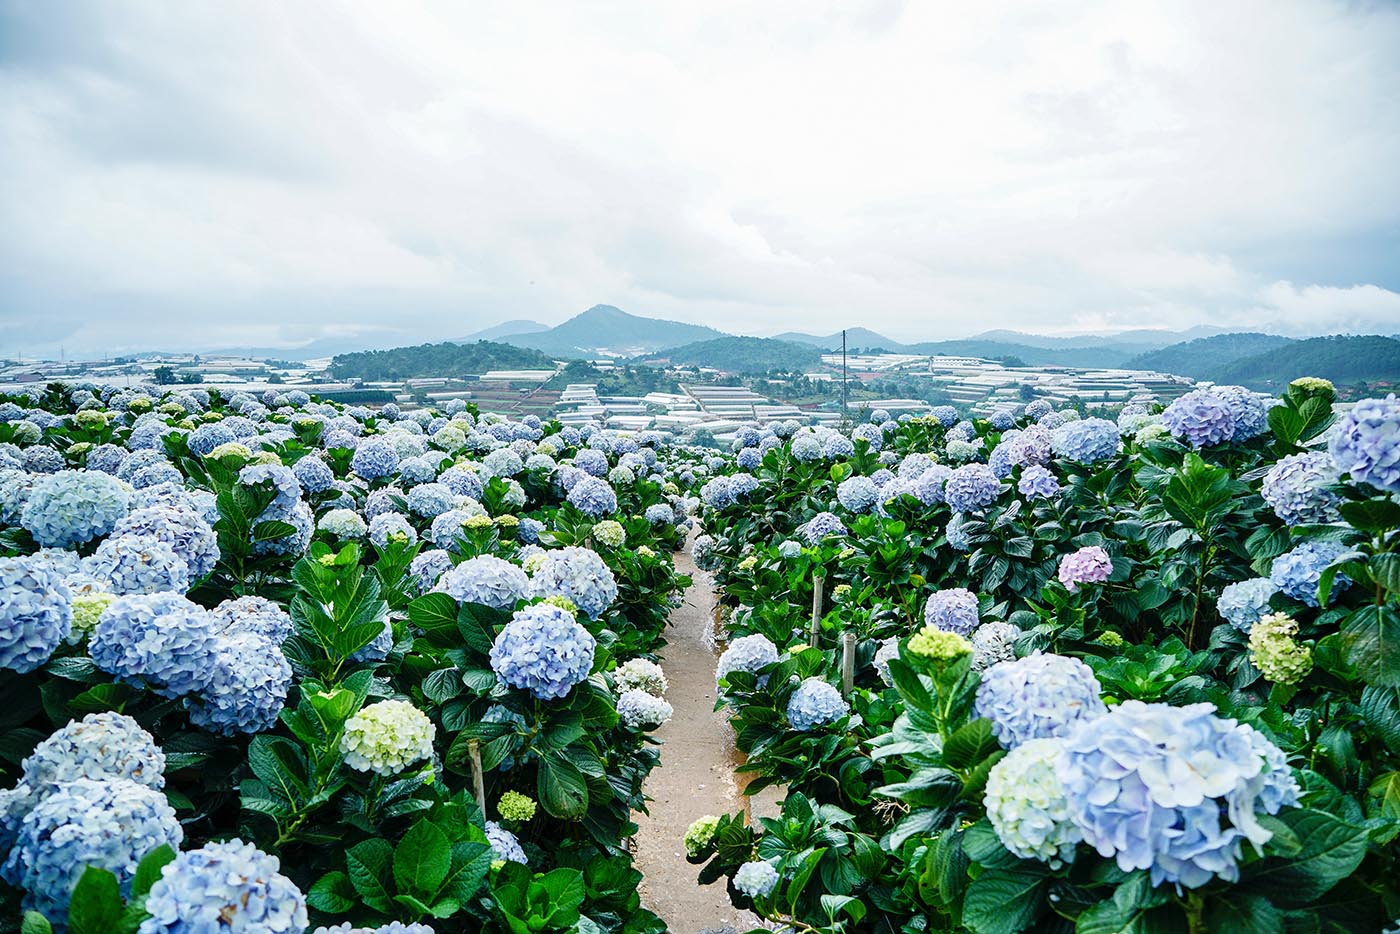 The 15 best attractions in Dalat - Vietnamnomad